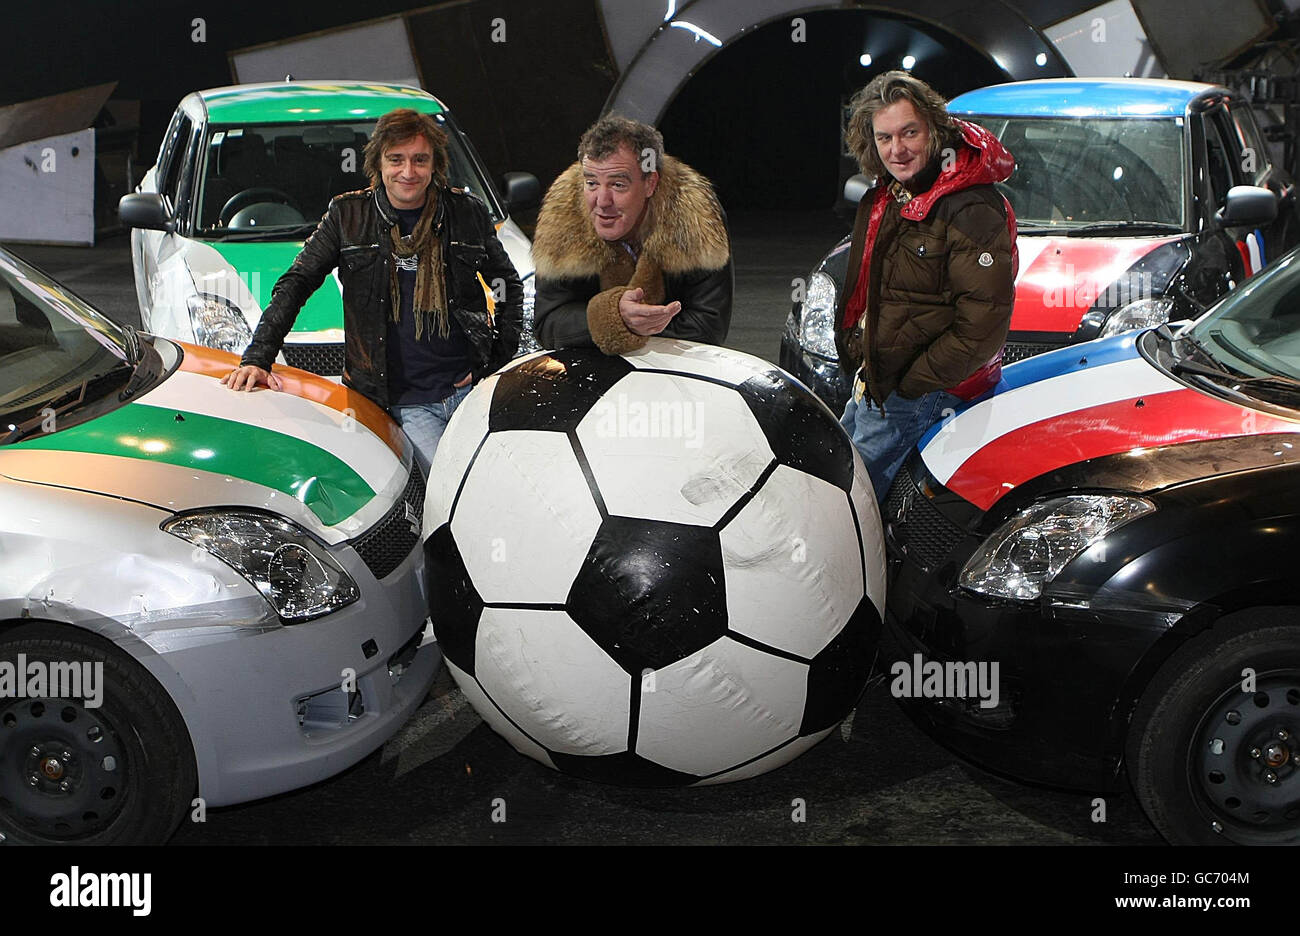 Jeremey Clarkson (centre), James May (right) and Richard Hammond (left) from BBC television programme Top Gear at the Top Gear Live show at the RDS Showgrounds, Dublin. Stock Photo